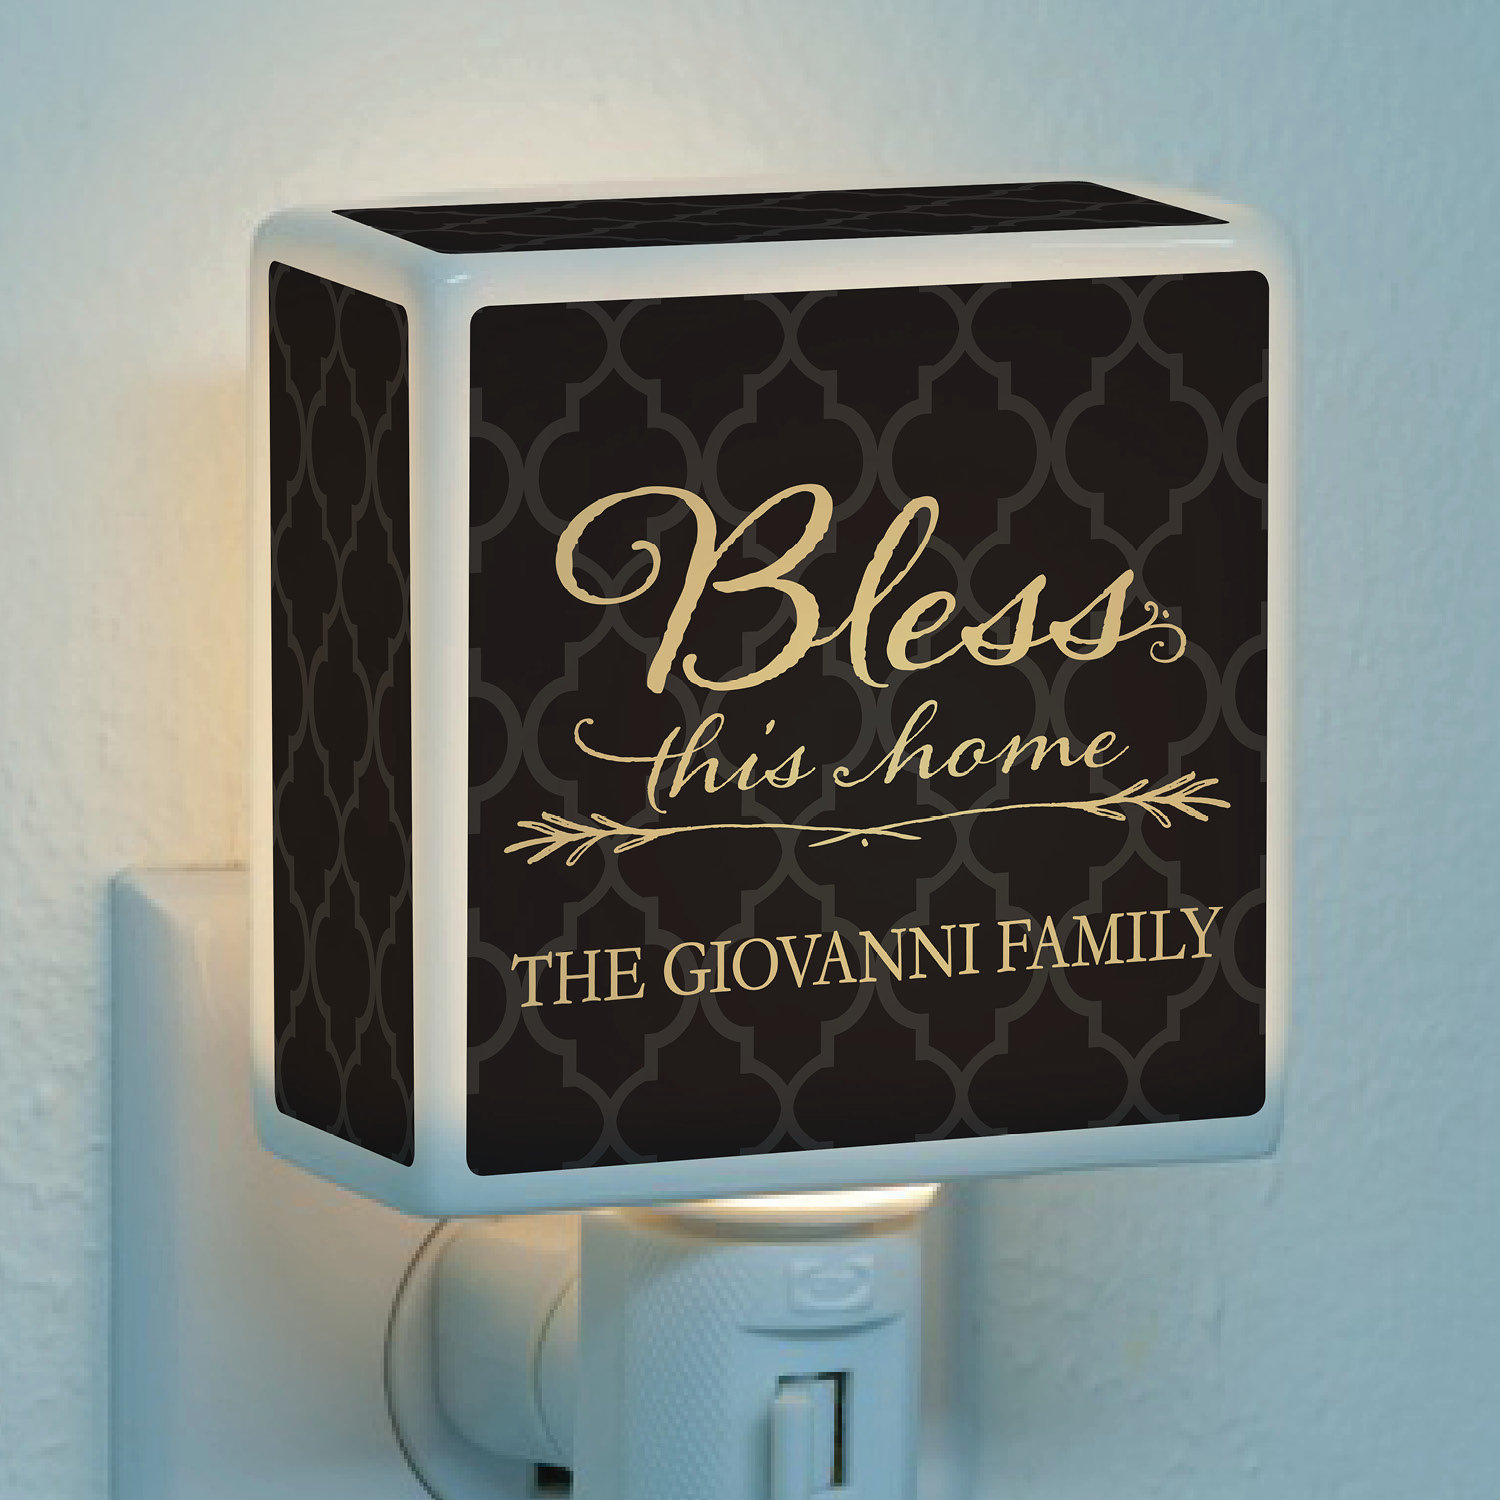 Bless This Home Personalized Nightlight